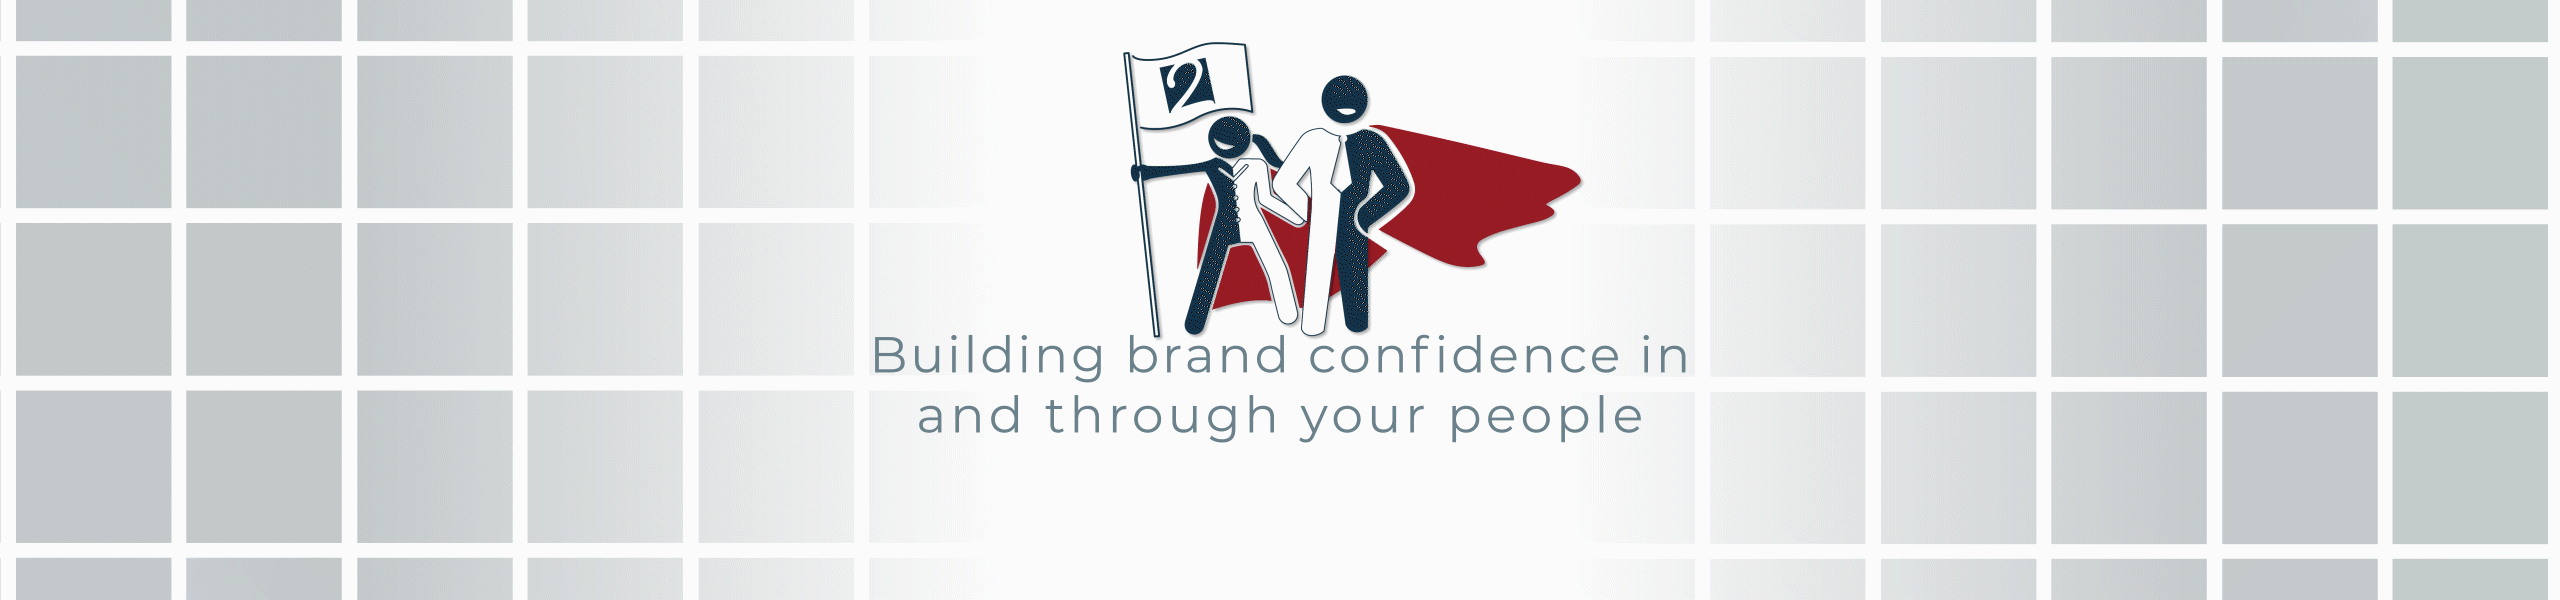 animated banner building brand confidence